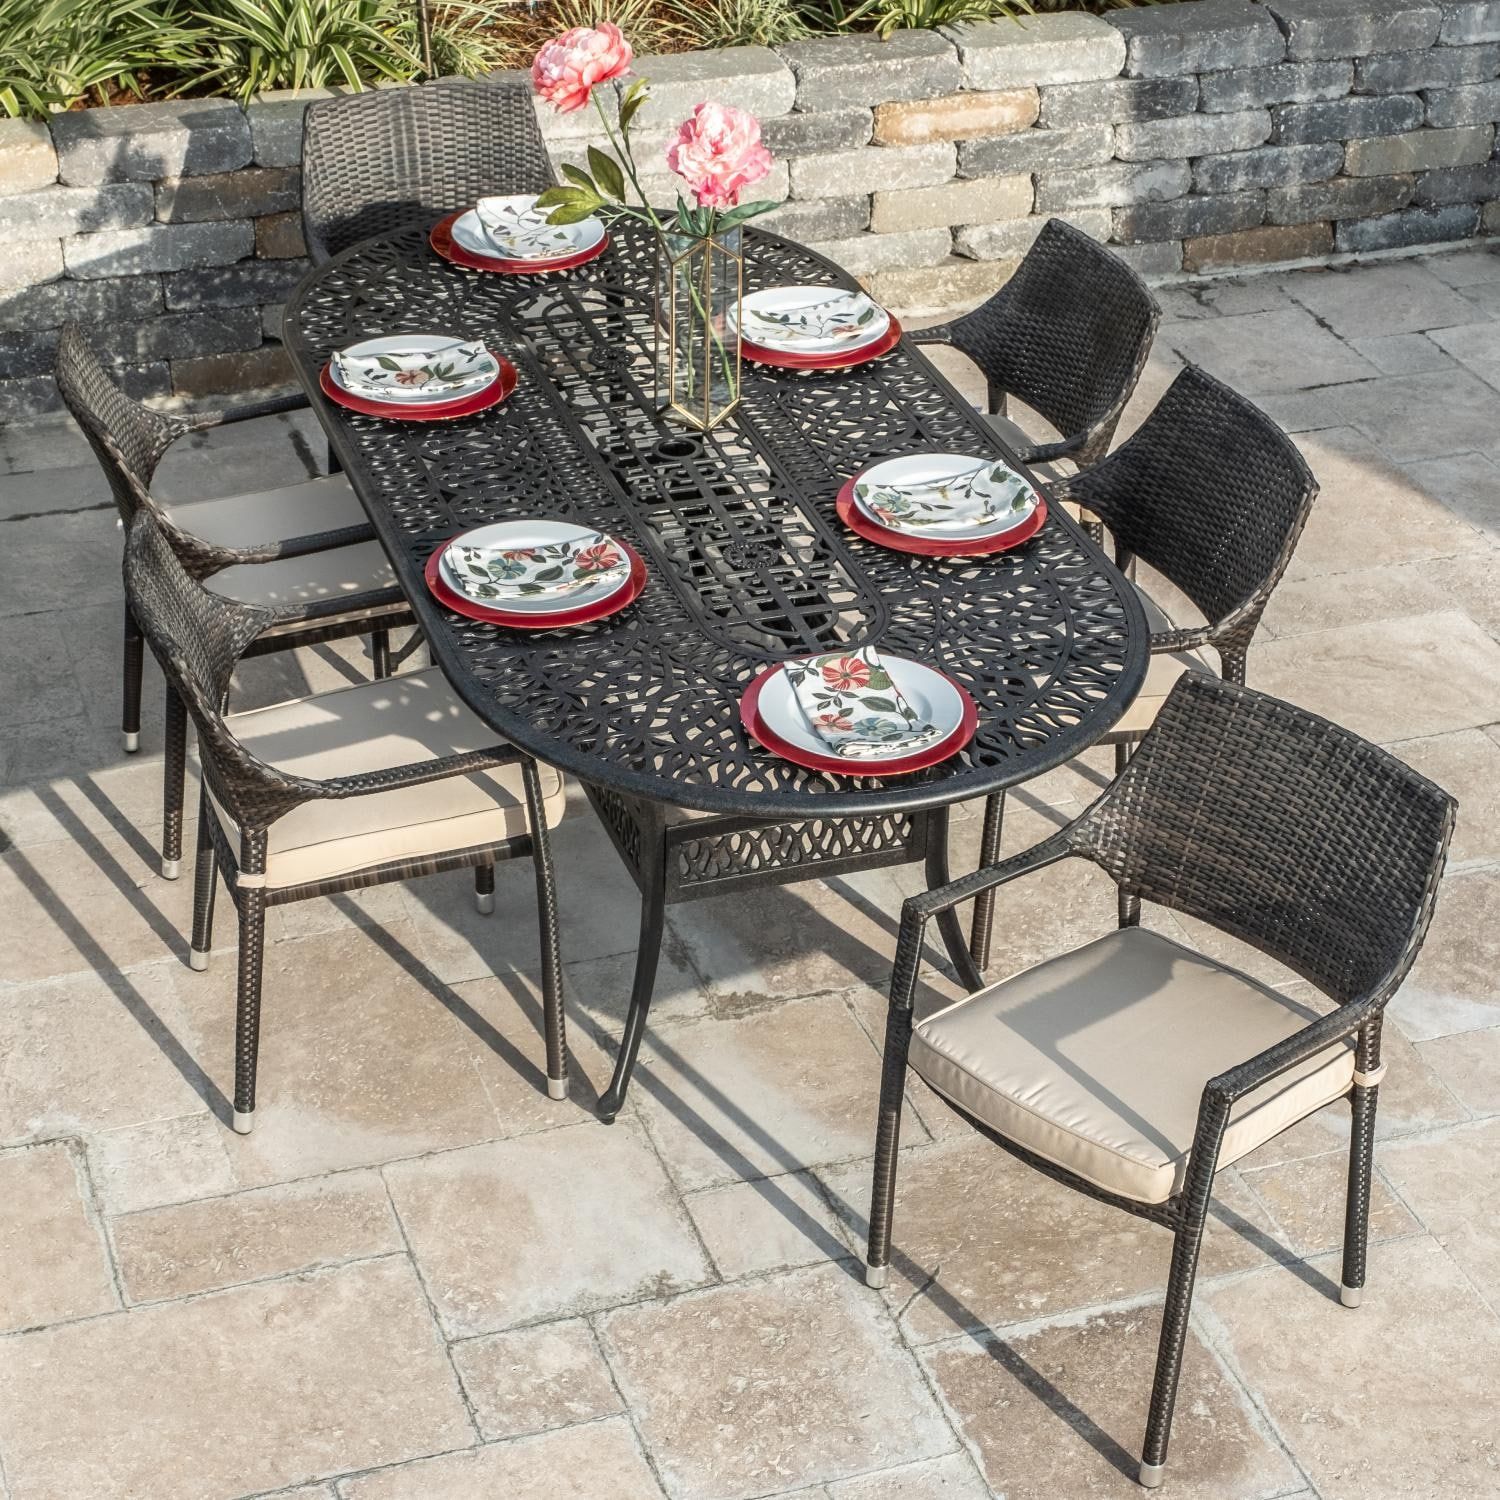 Gentilly 7 Piece Wicker Patio Dining Set W/ 86 X 42 Inch Oval Table For Oval 7 Piece Outdoor Patio Dining Sets (View 9 of 15)